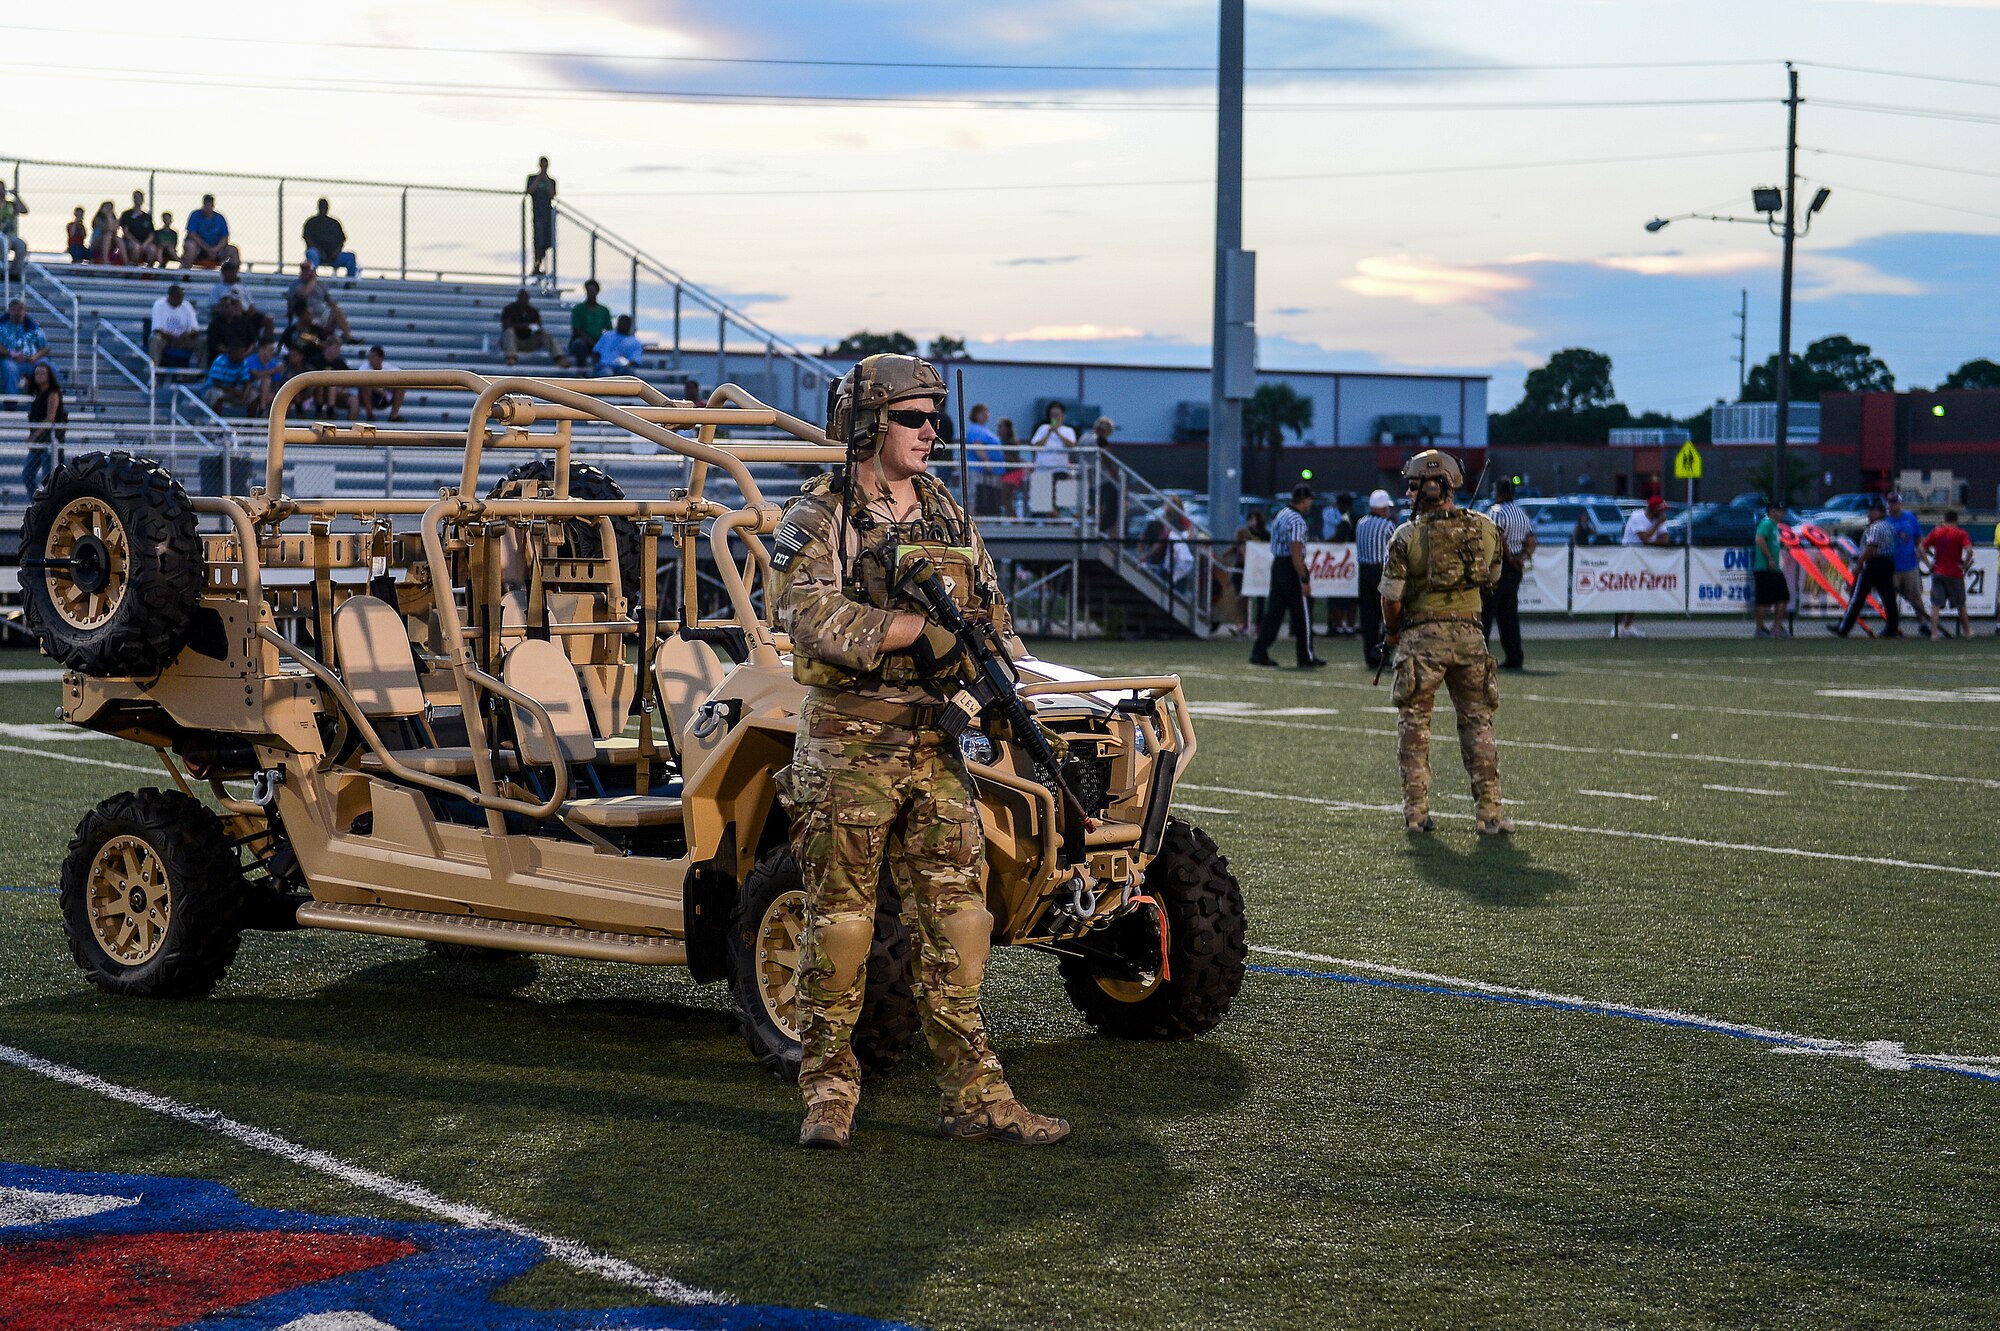 Members of the Special Tactics Training Squadron perform a capabilities demonstration at Fort Walton Beach High School, Fort Walton Beach, Fla., Sept. 12, 2014. F W B High School hosted the 24th Special Operations Wing for the school’s annual Military Appreciation Night. (U.S. Air Force photo/Airman 1st Class Jeff Parkinson)